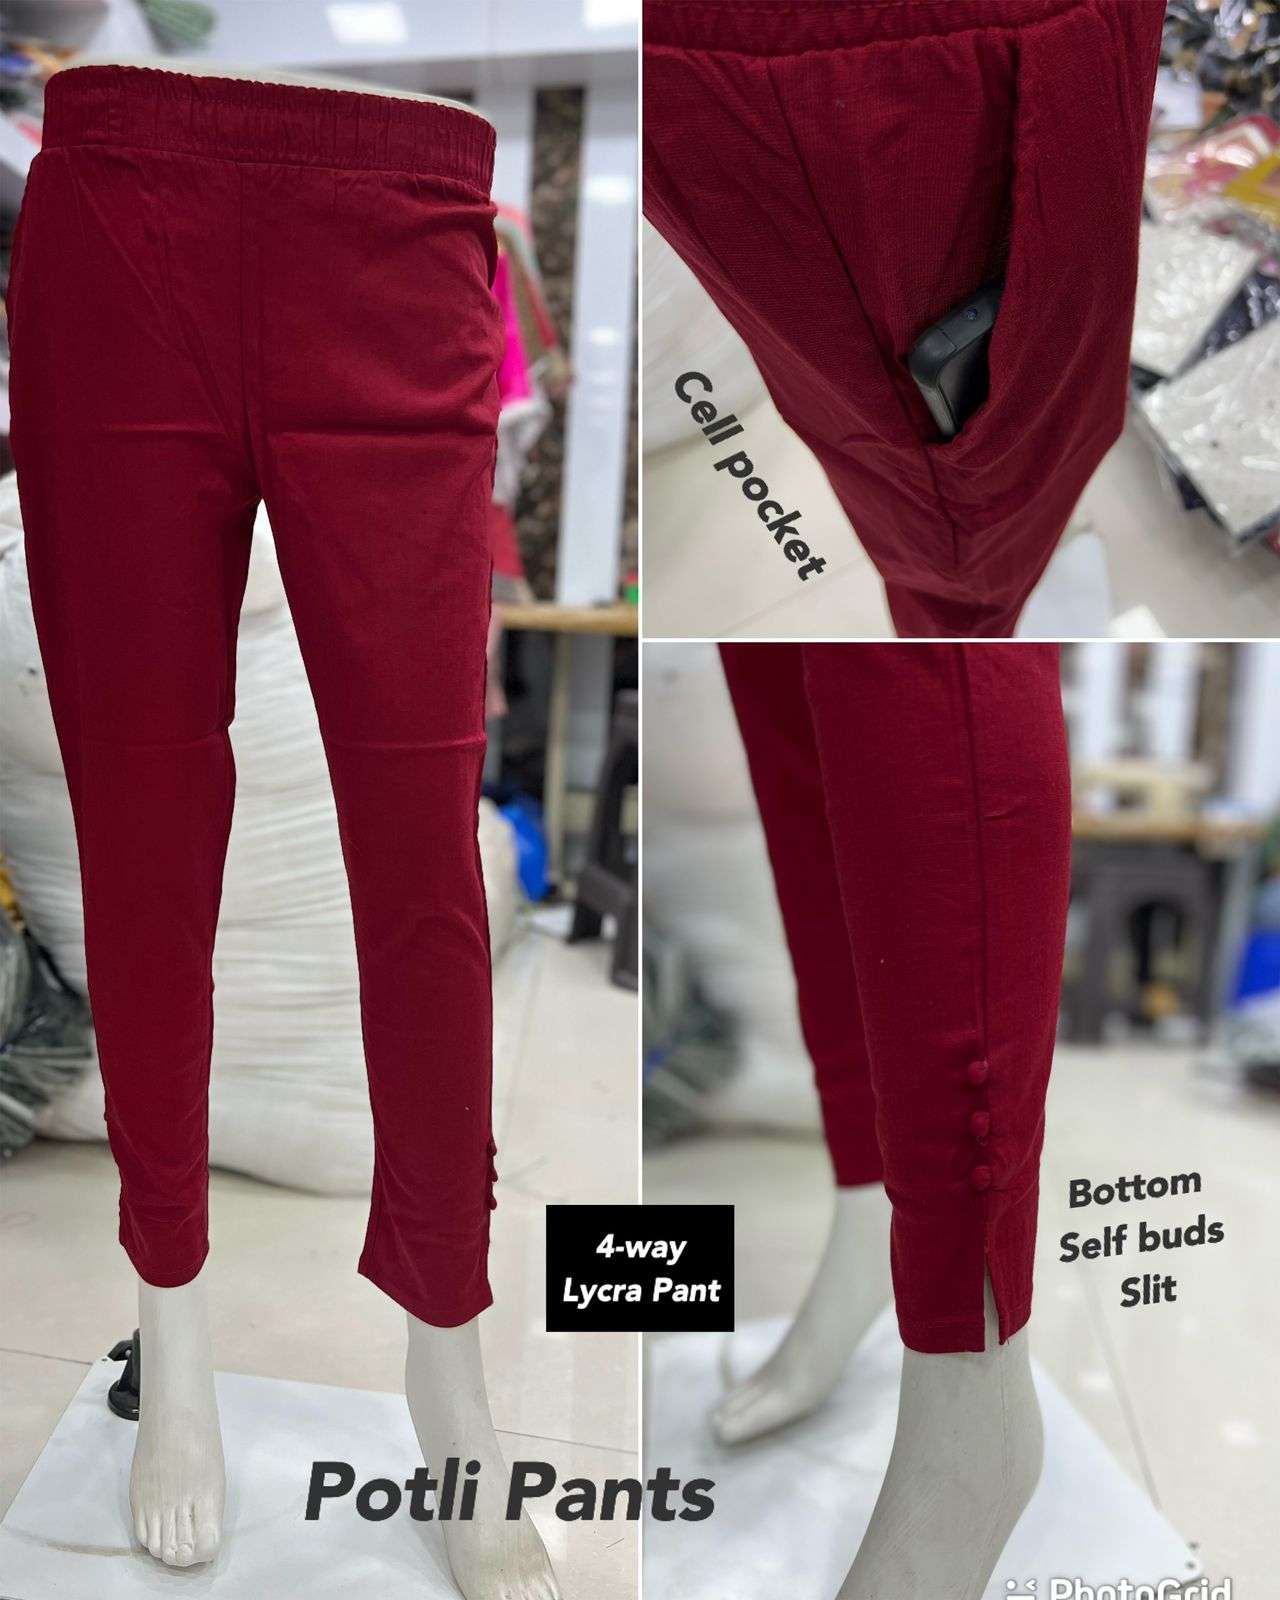 potli pants 4 way cotton lycra pants in 10 colors fabric cotton lycra with one side cell pocket self buds and slit at bottomwear pants